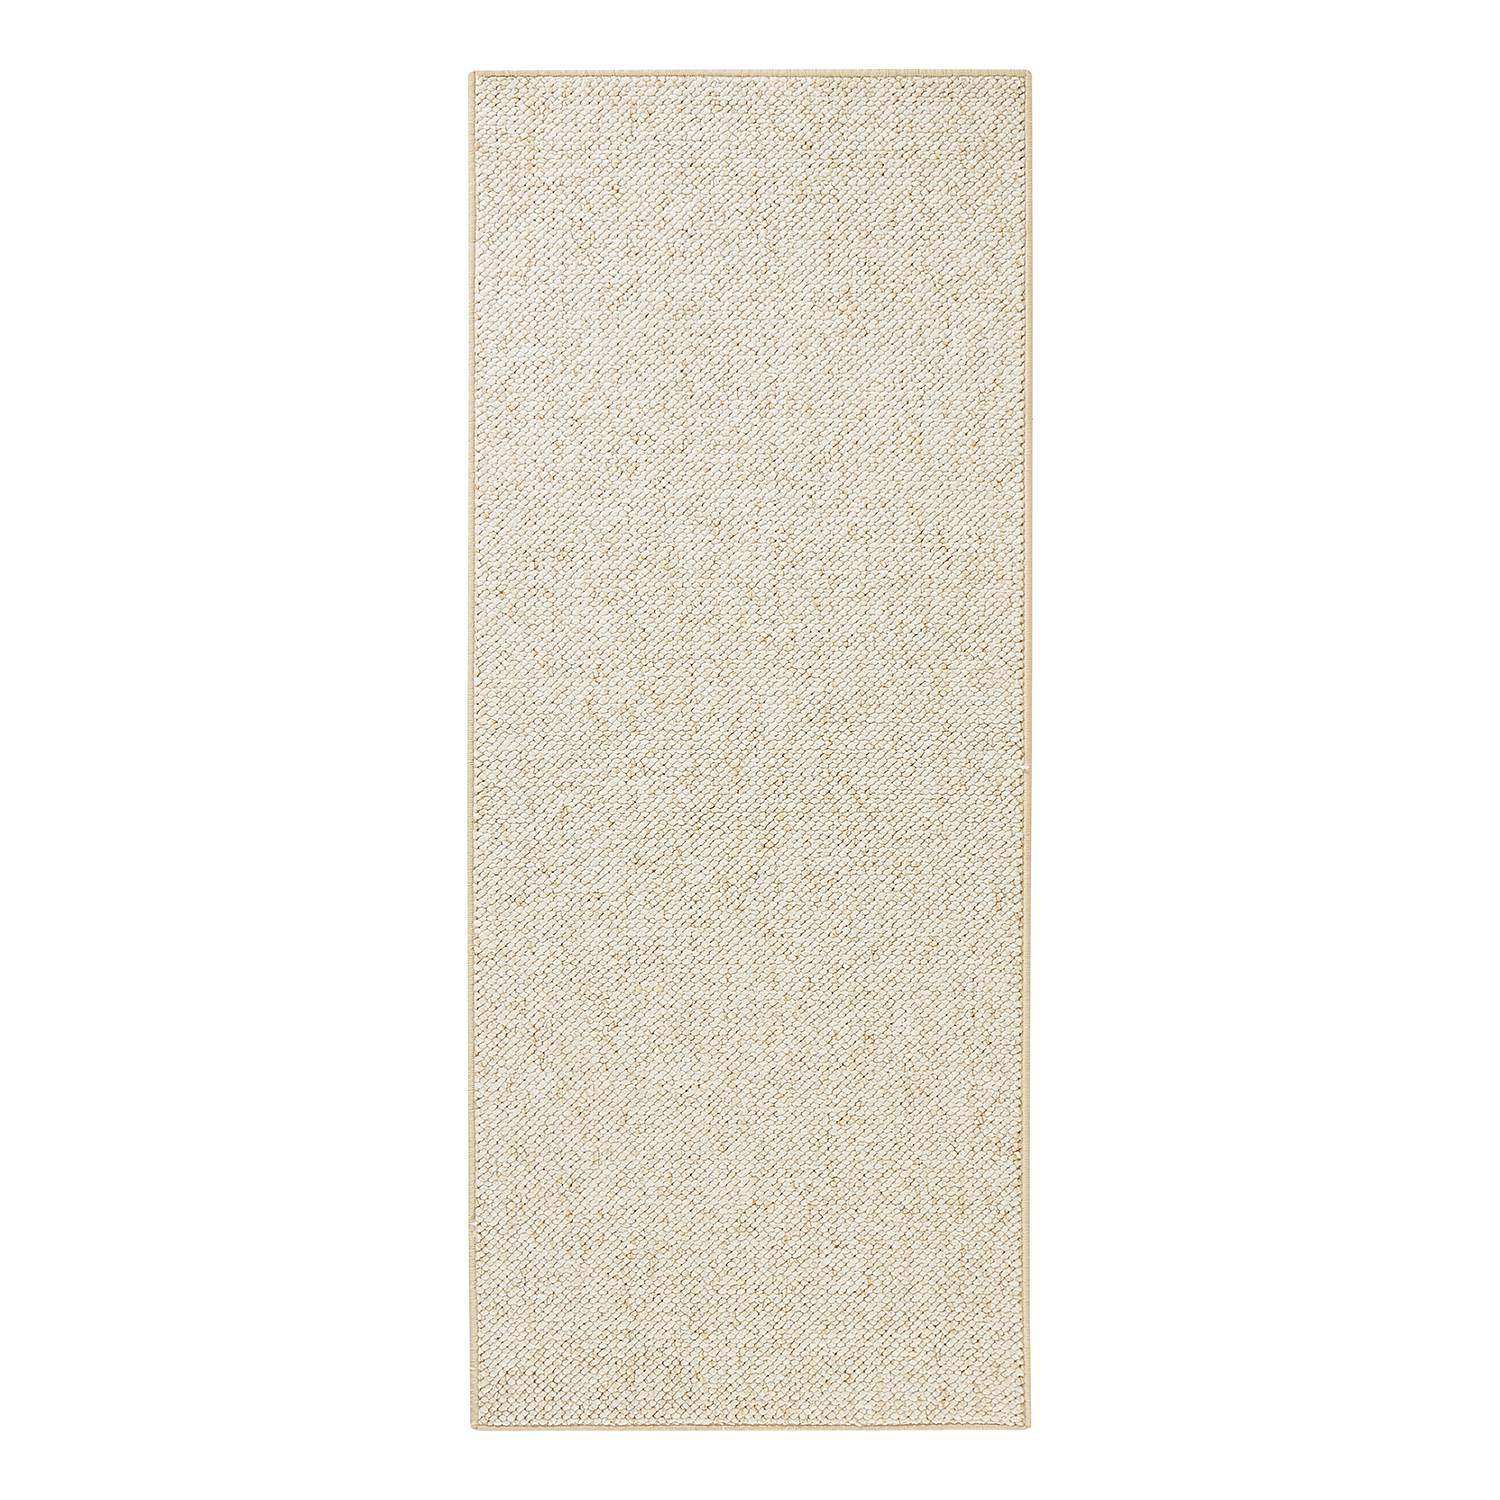 Image of Tapis de couloir Wolly 000000001000122578